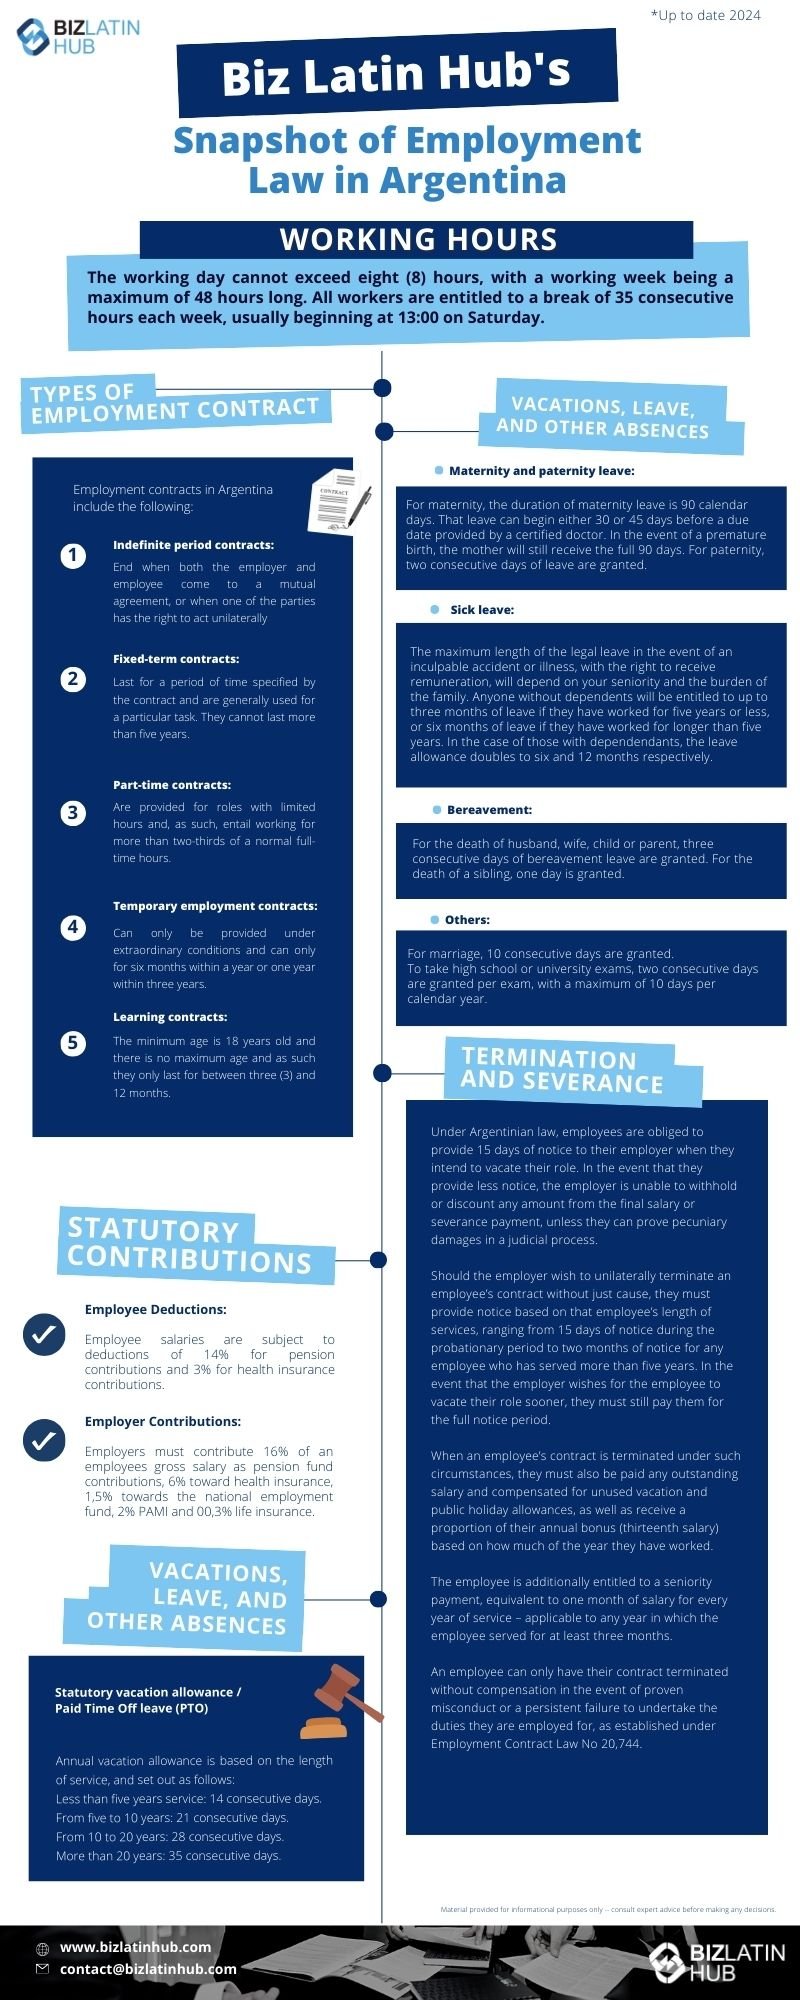 Infographic titled "Biz Latin Hub's Snapshot of Employment Law in Argentina." It covers various topics such as working hours, types of employment contracts, statutory deductions, vacations, leave, other absences, termination, and severance. The text contains detailed legal information on employment law in Argentina.